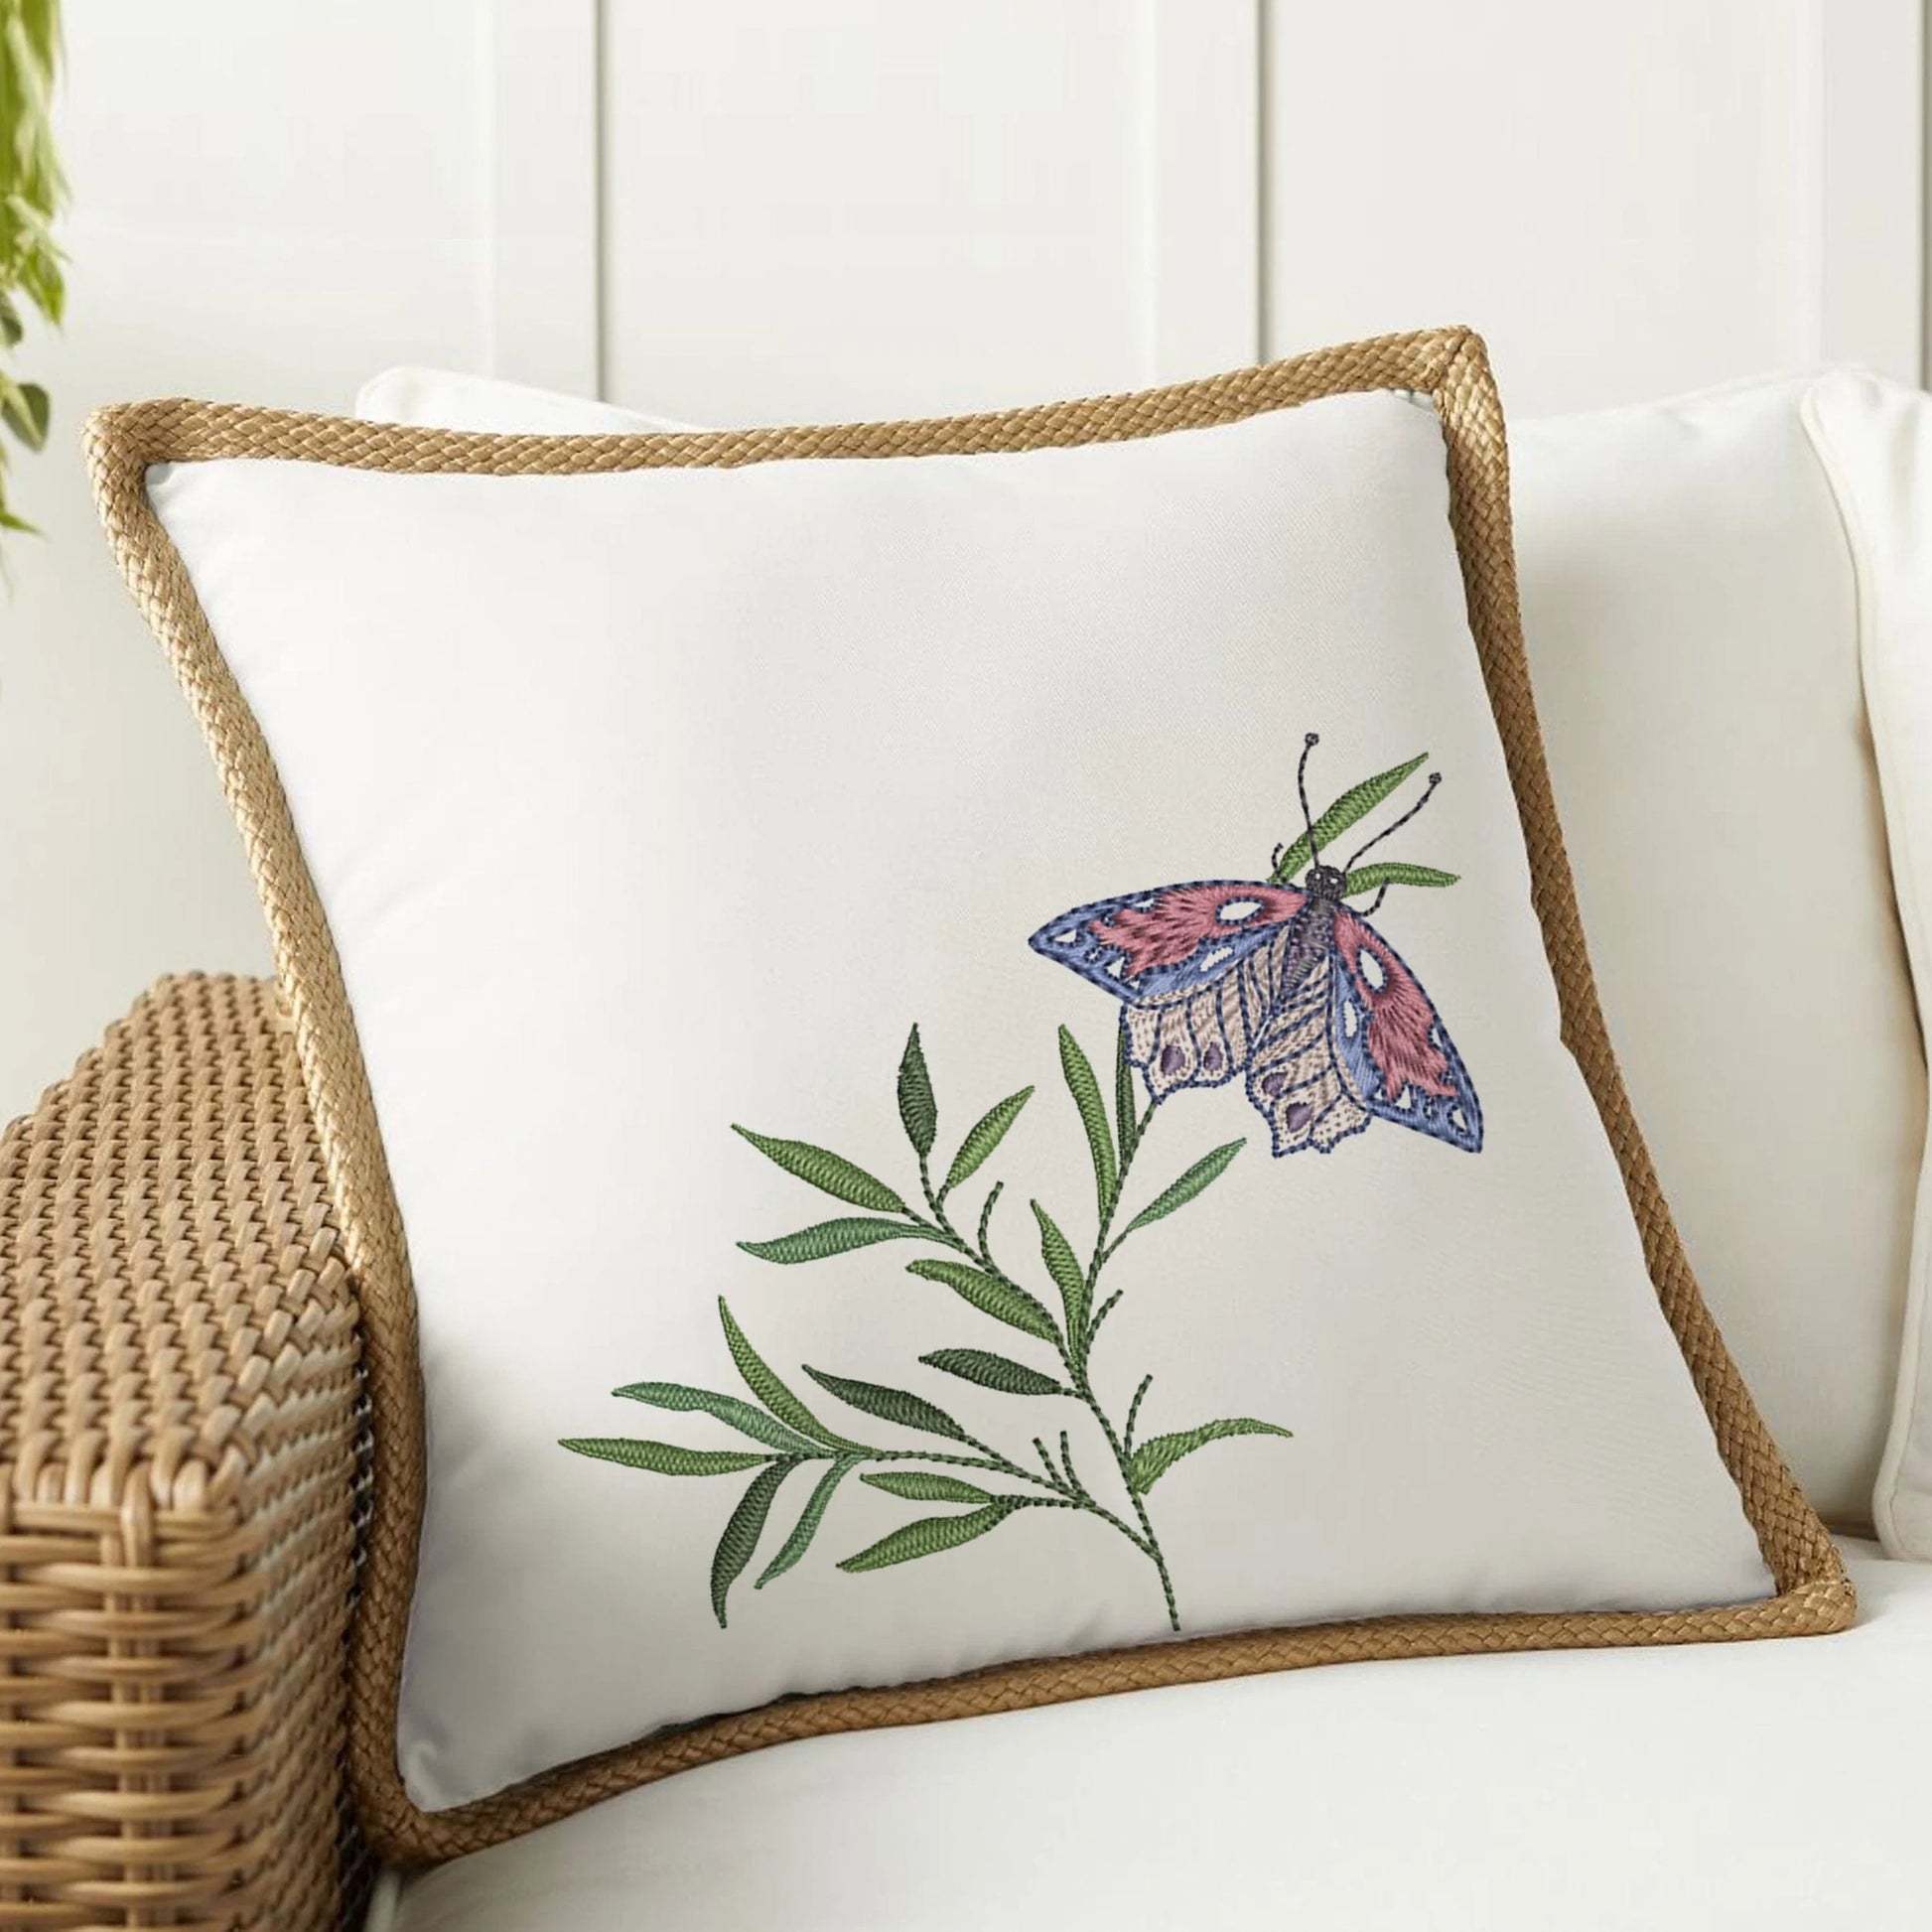 Flower Butterfly Machine Embroidery Design on pillow